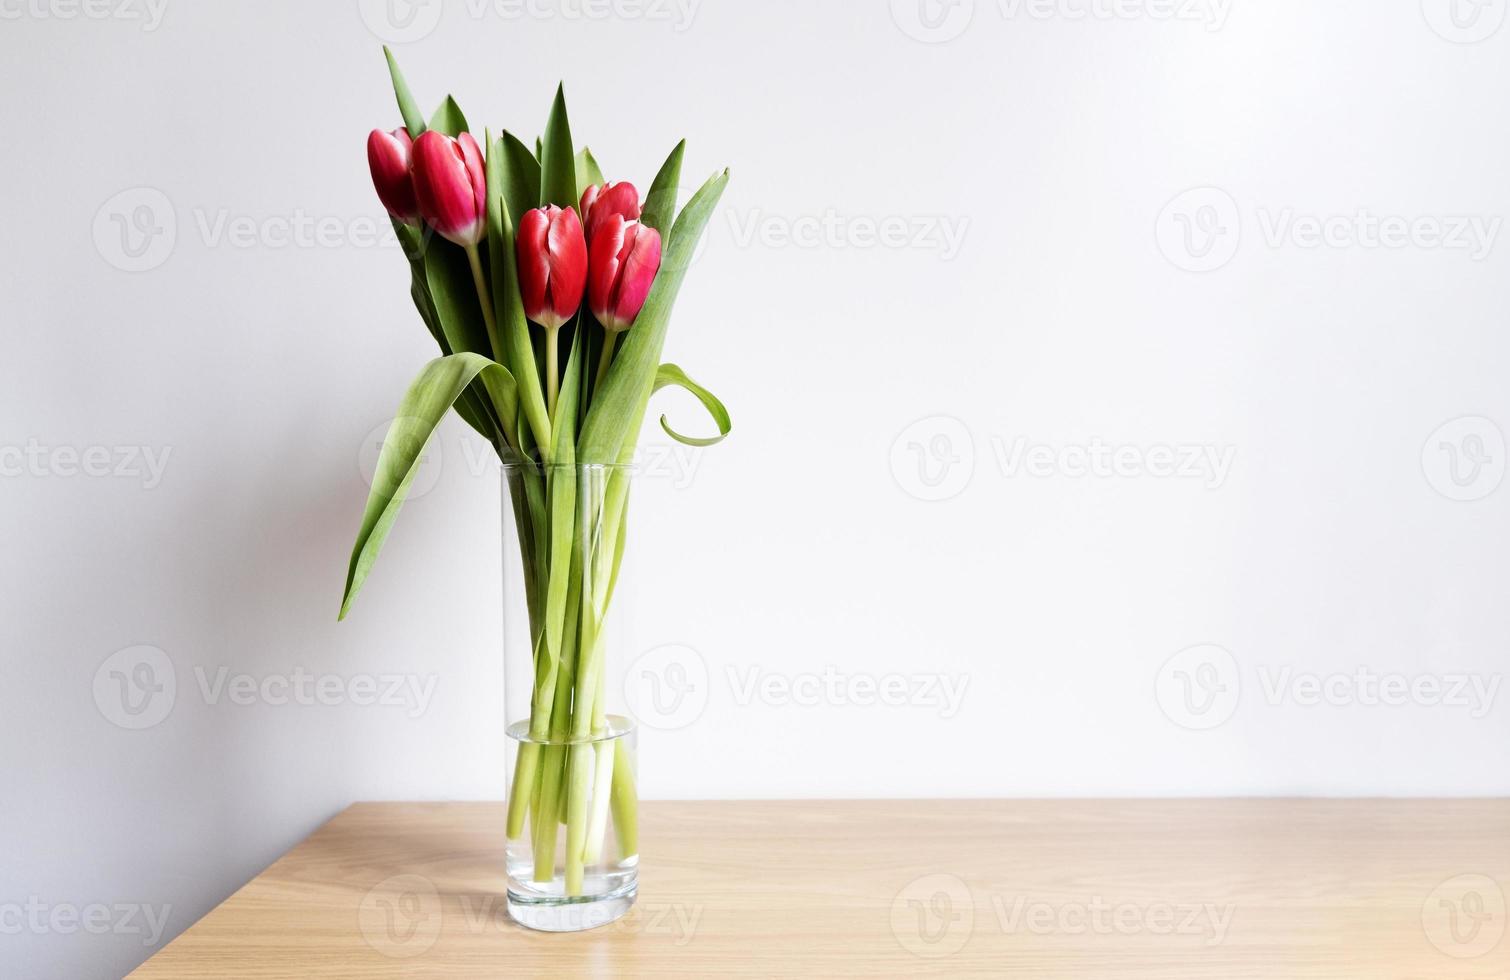 Pink tulip flowers in transparent glass vase on wooden table, early spring romantic holiday gift concept with copy space, Mother's day design, selective focus, home interior decor photo